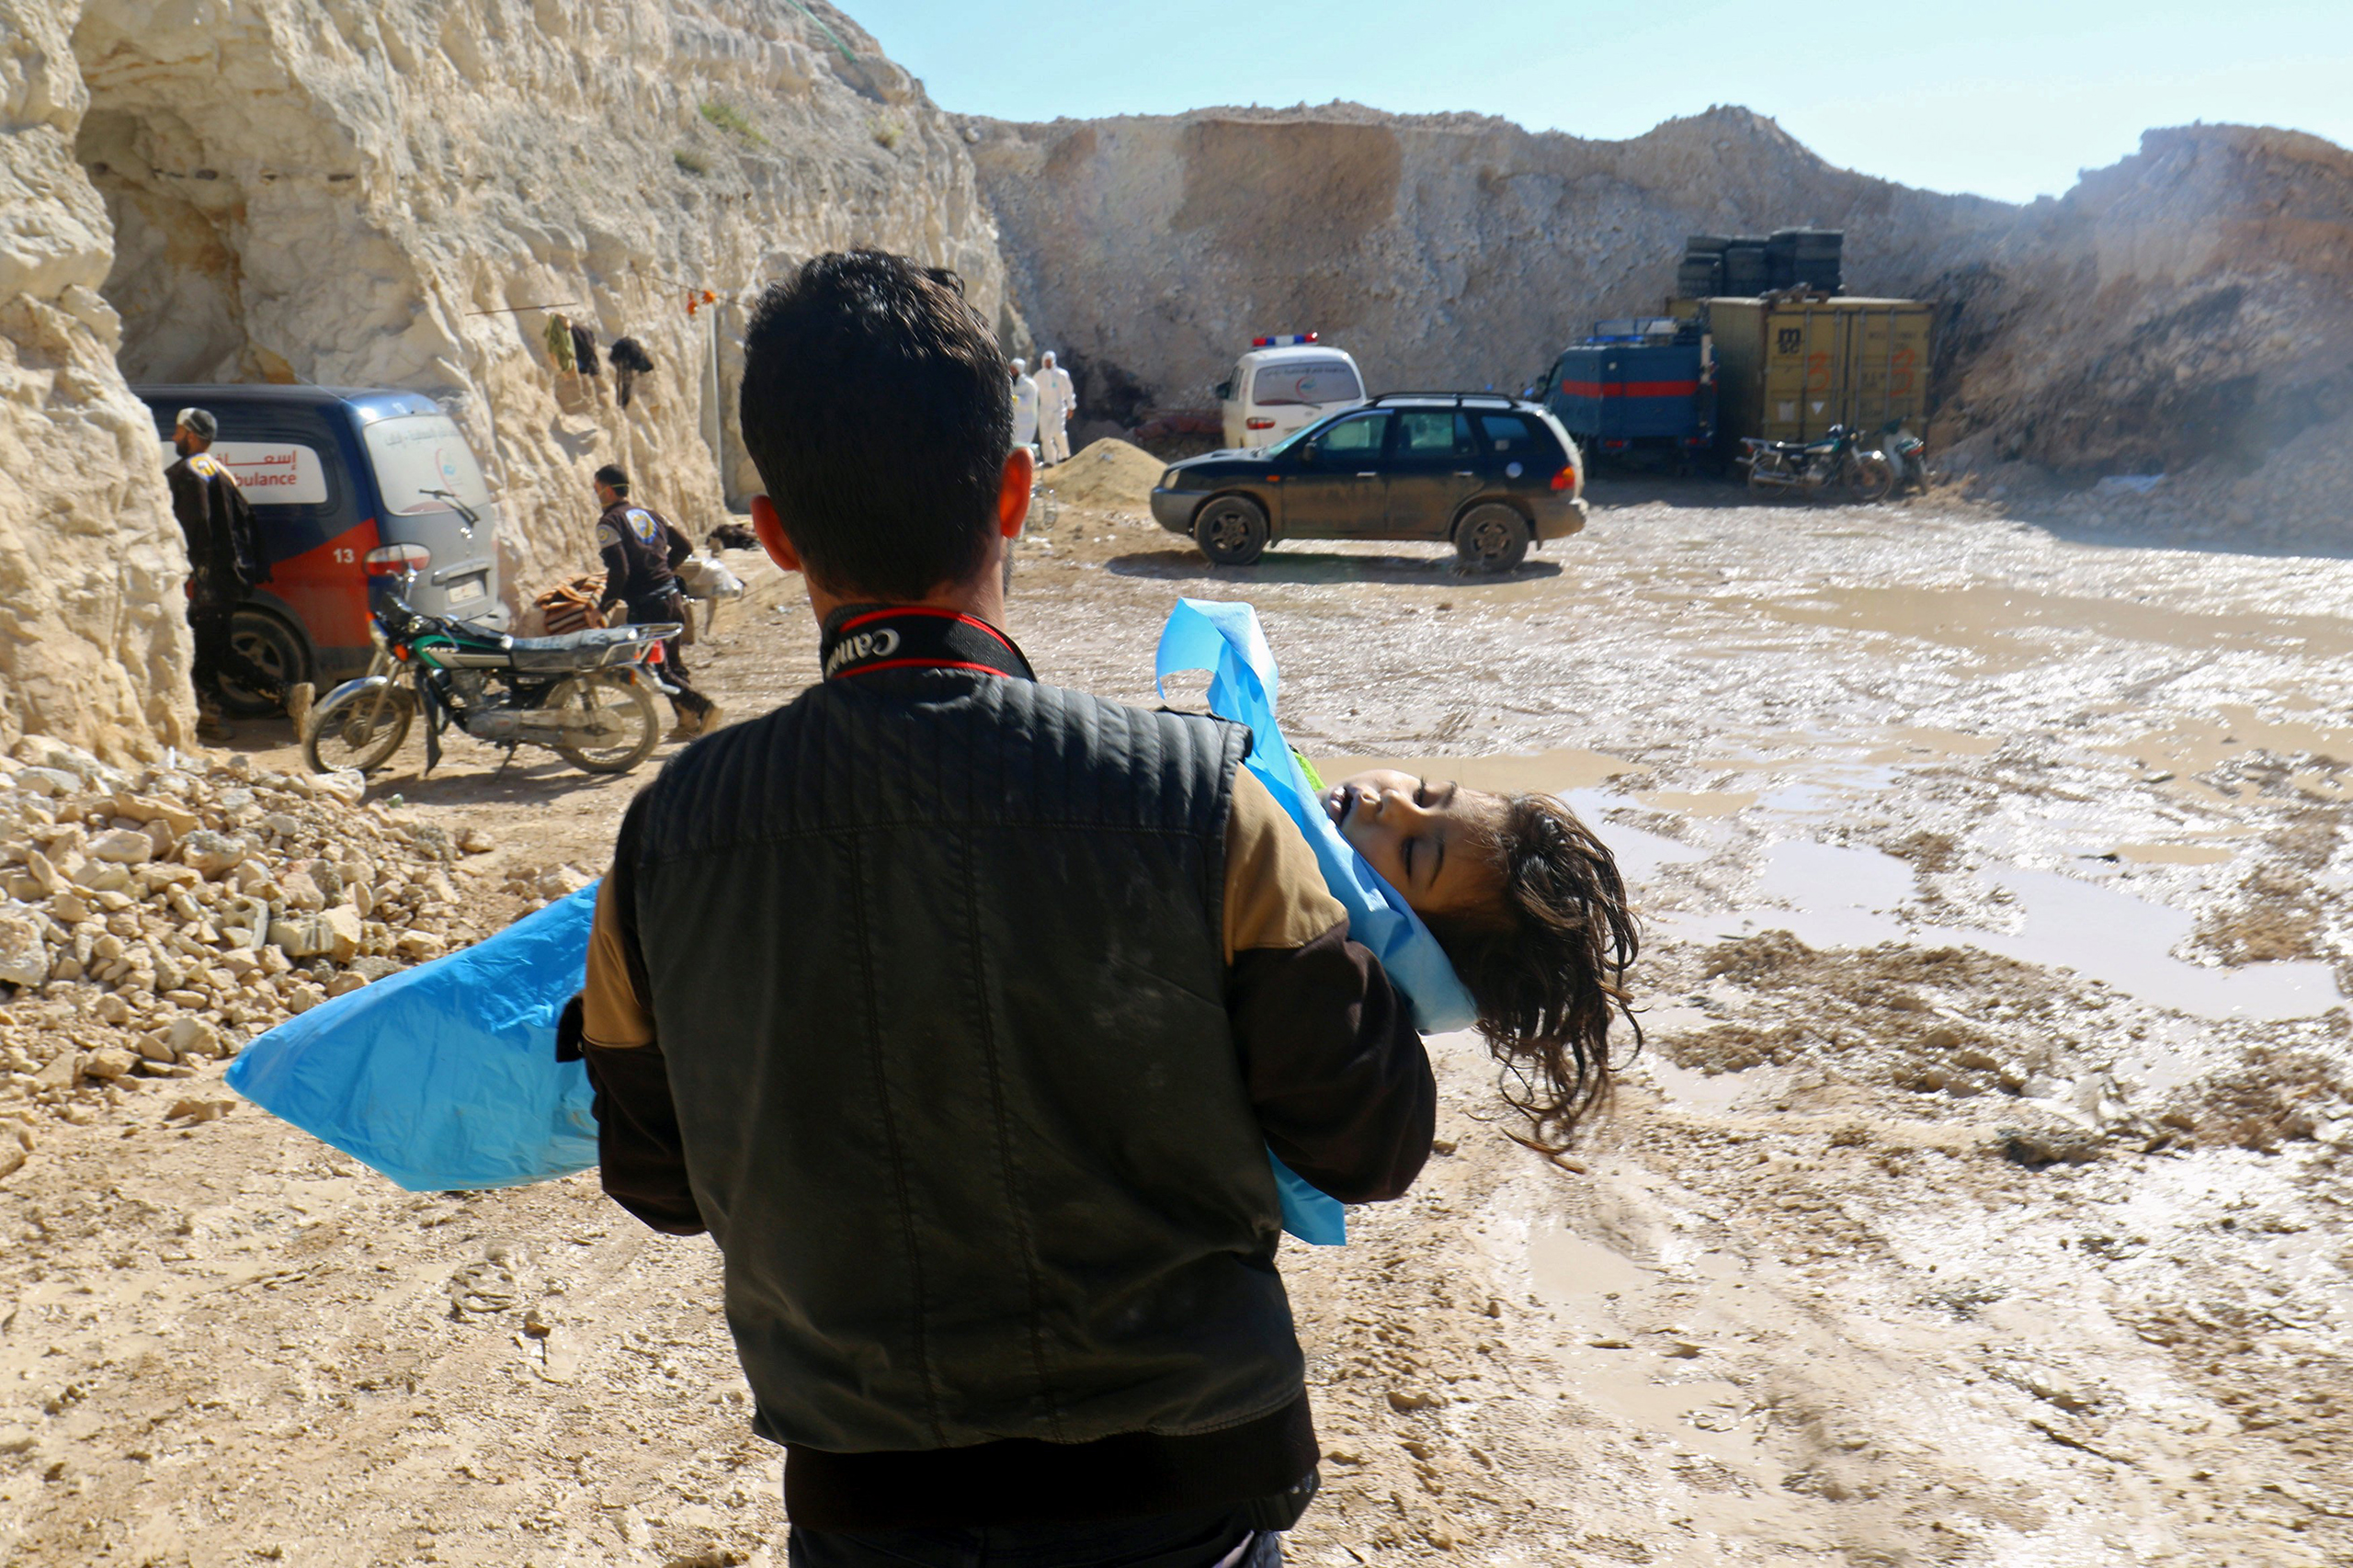 A man carries the body of a dead child, after what rescue workers described as a suspected gas attack in the town of Khan Sheikhoun, Syria, on April 4, 2017. (Ammar Abdullah—Reuters)